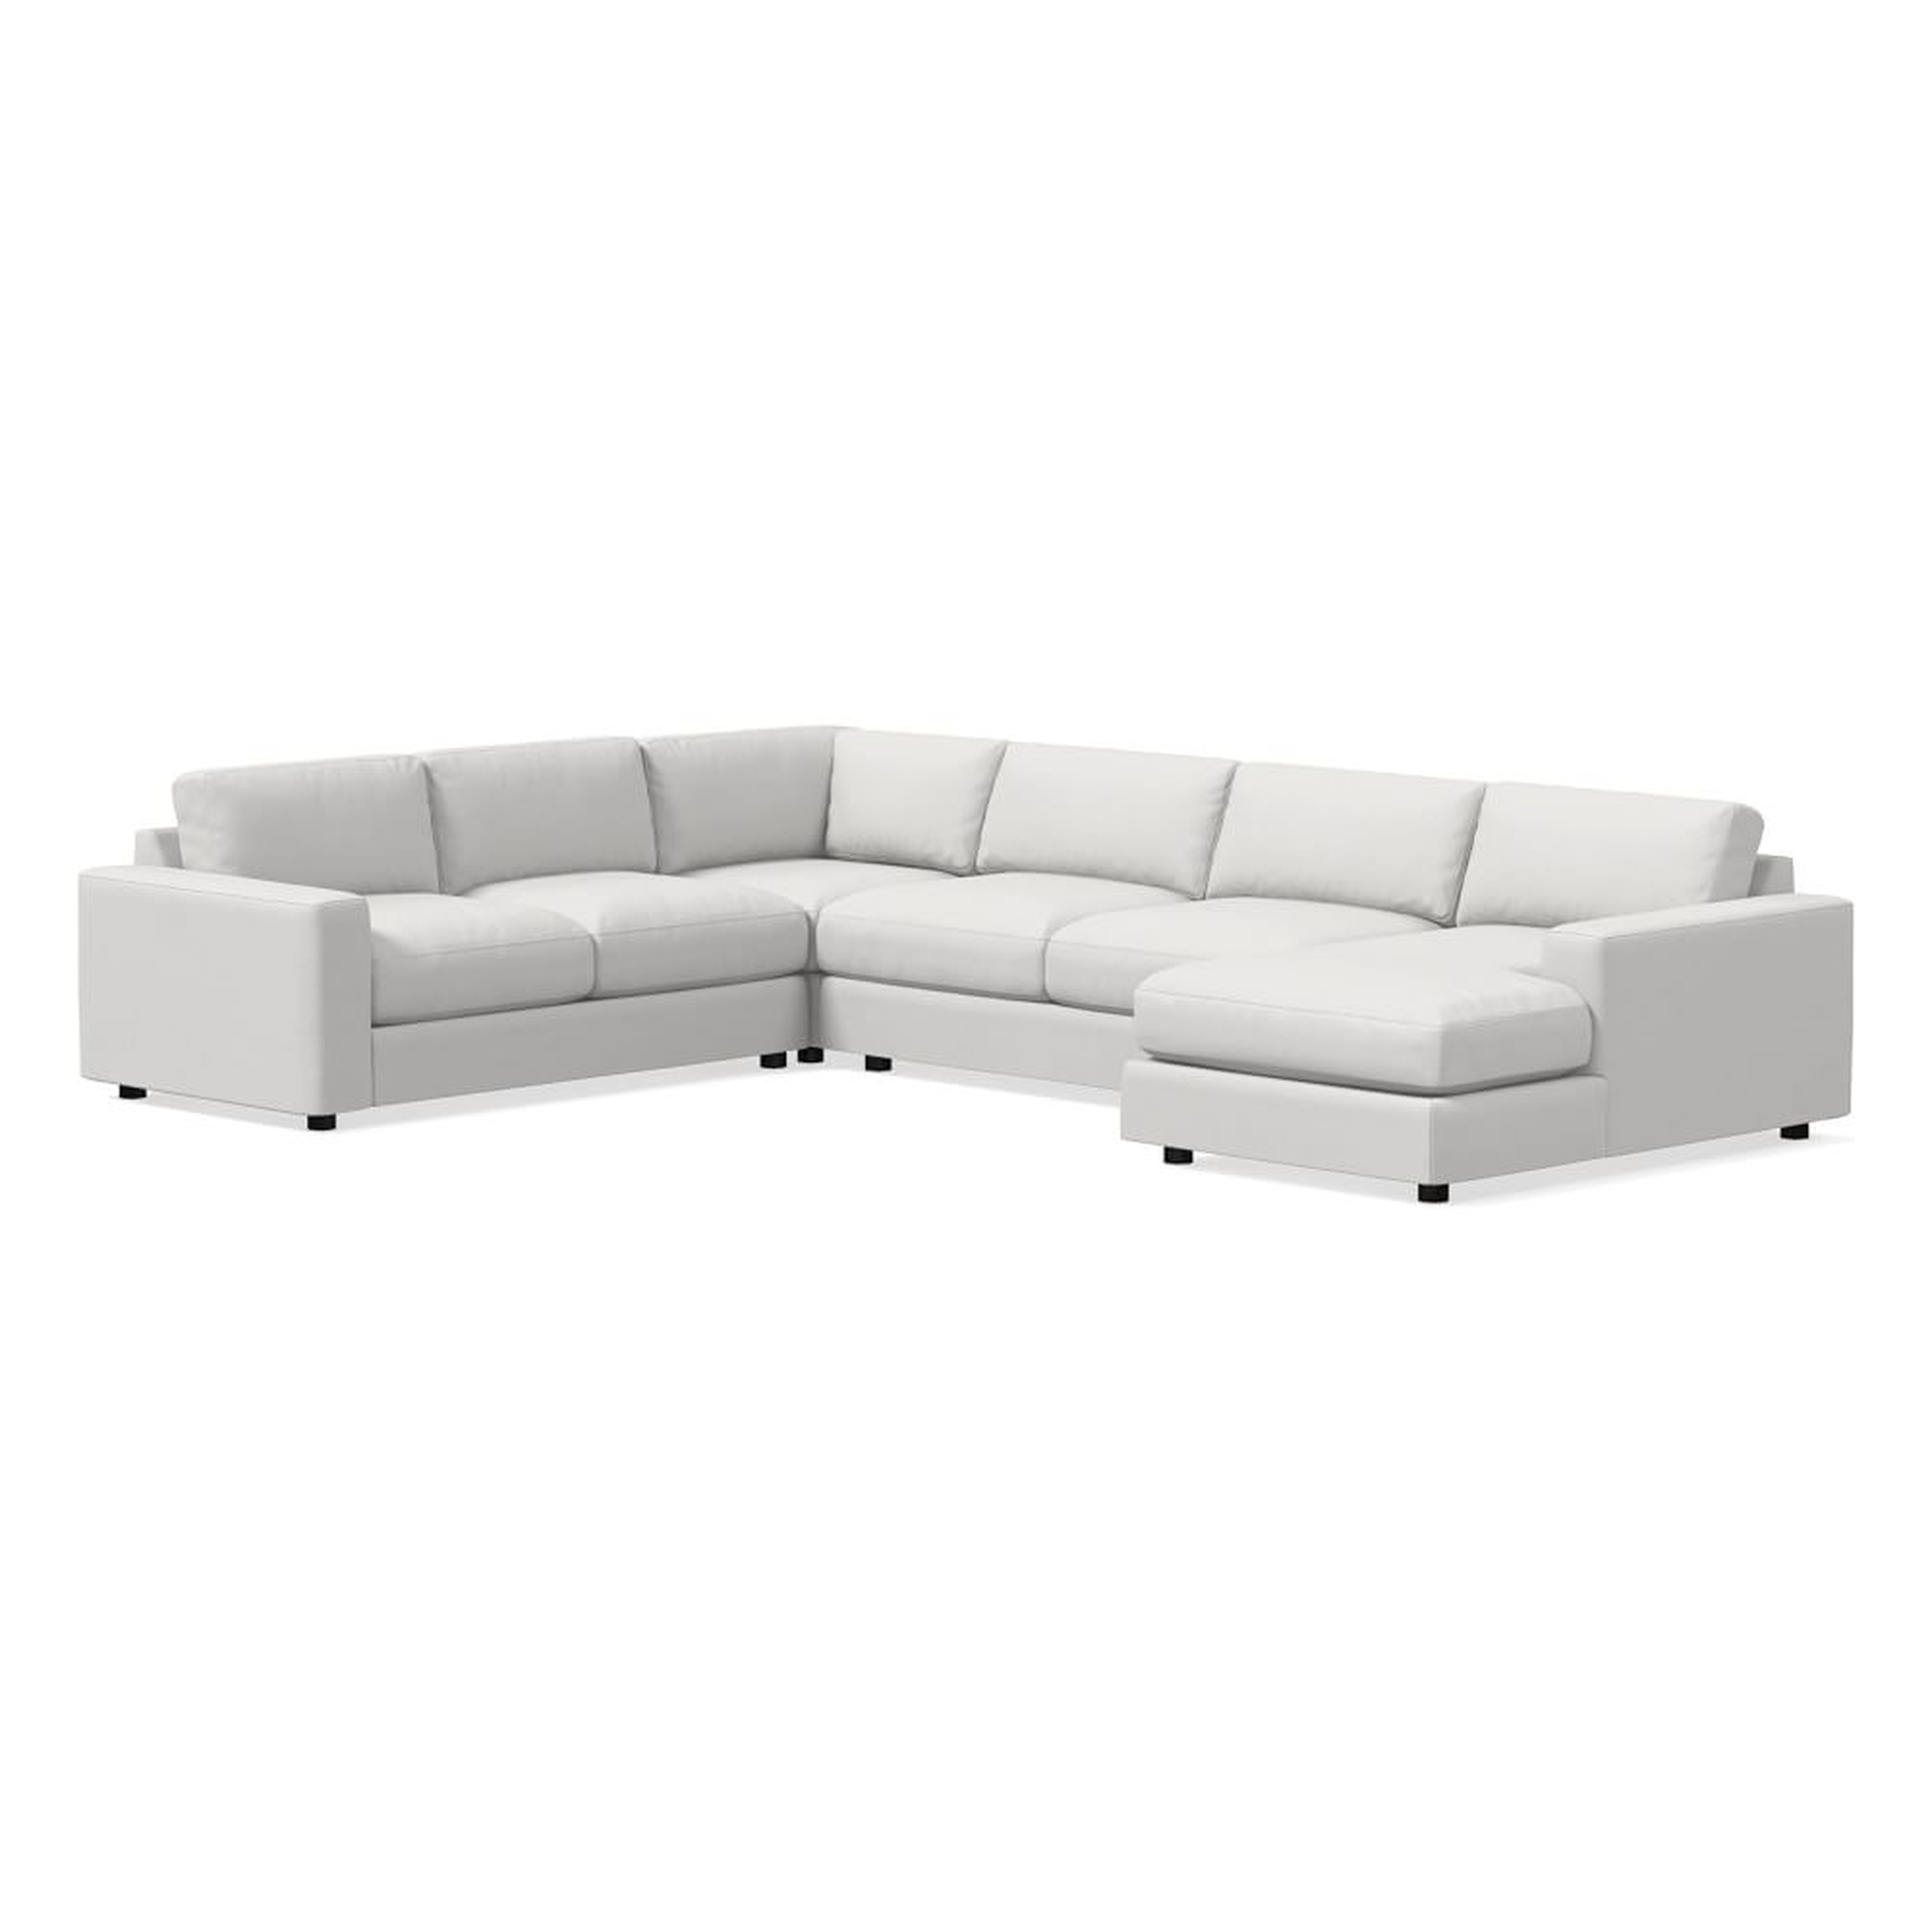 Urban 106" Right 4-Piece Chaise Sectional, Performance Washed Canvas, White, Down Blend Fill - West Elm